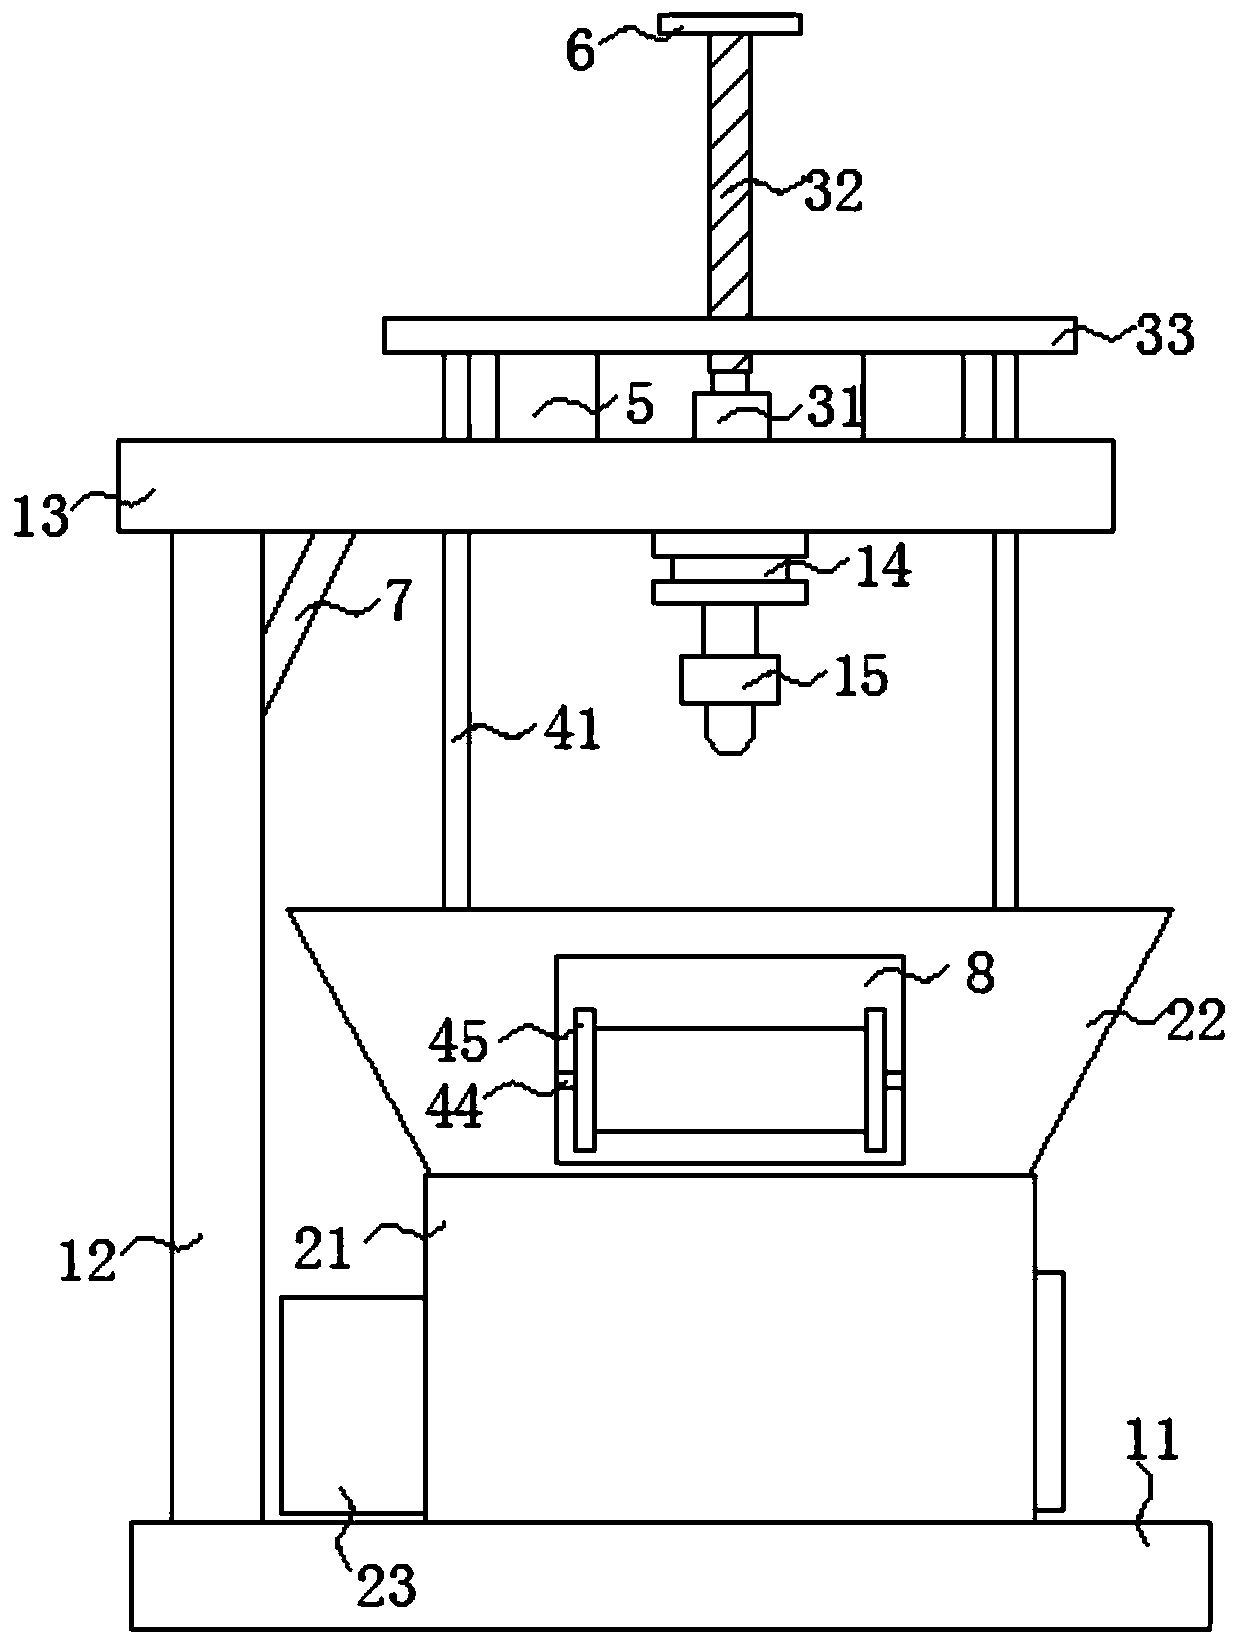 Numerically-controlled machine tool with chip collecting and squeezing function